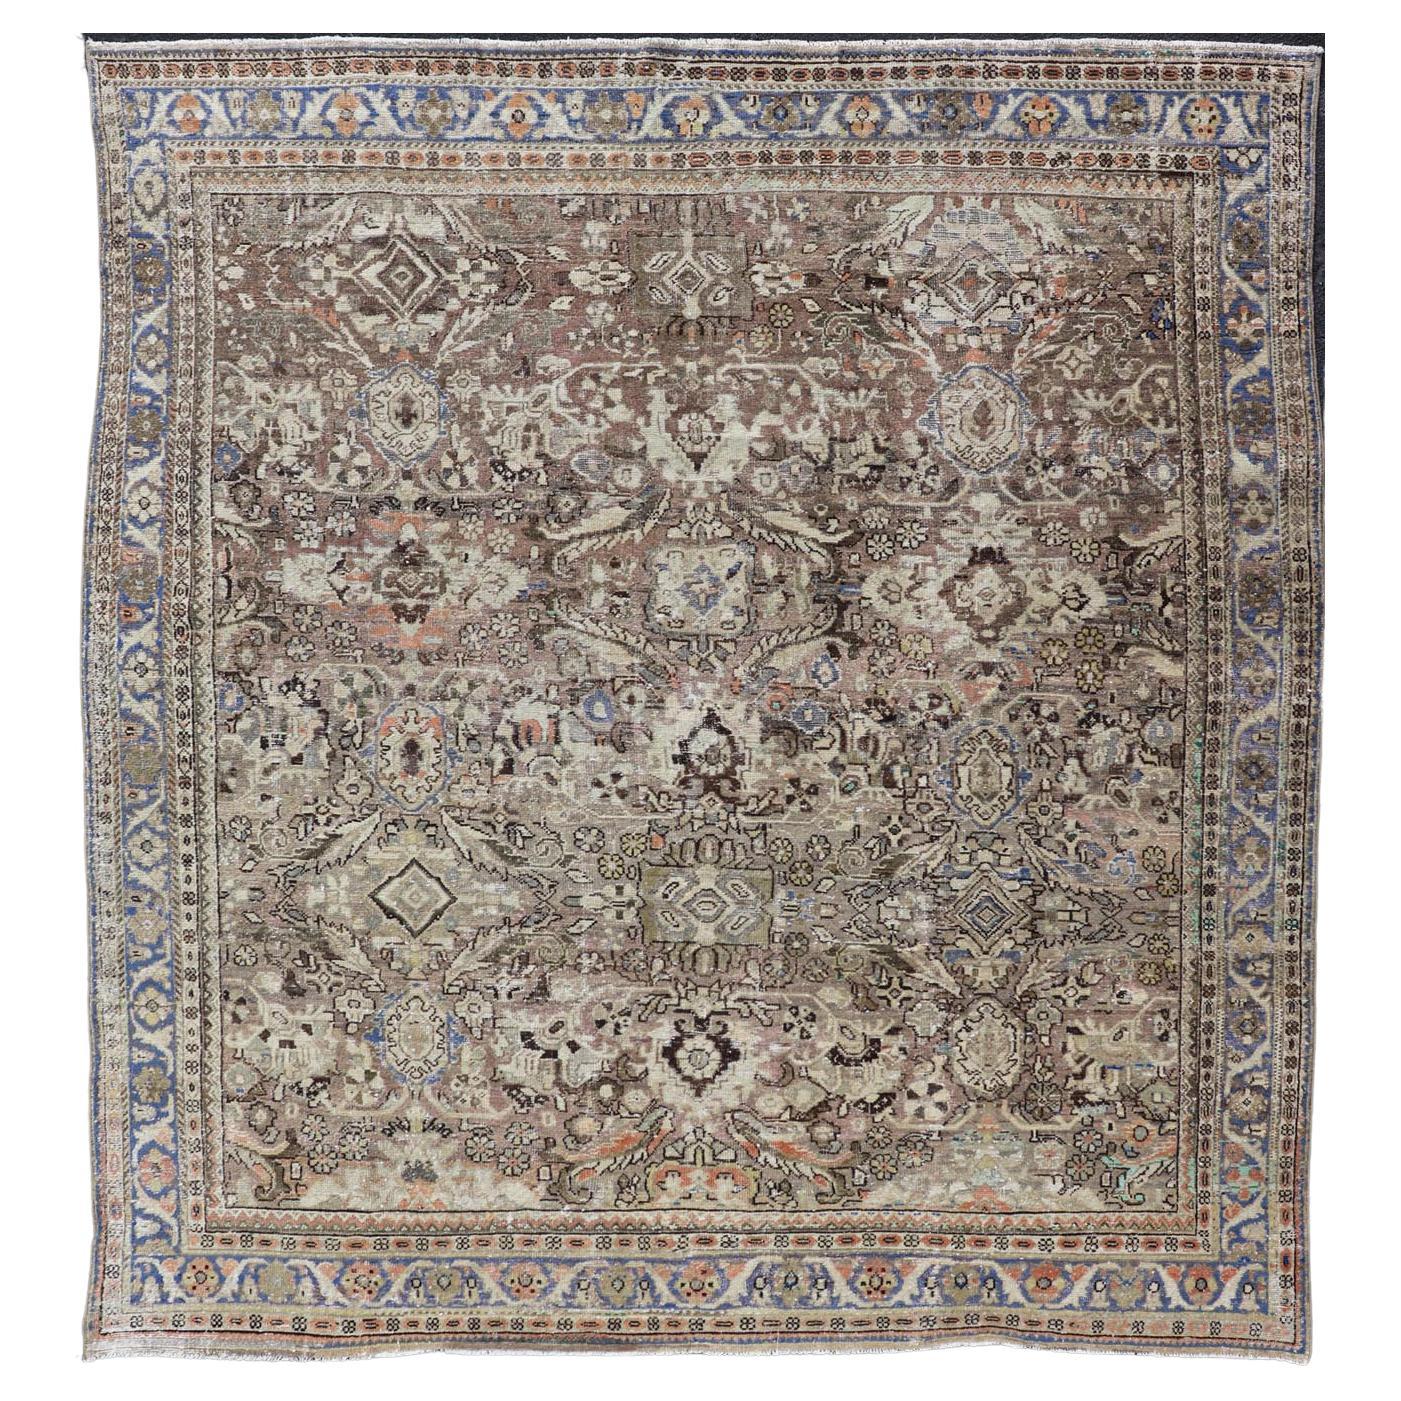 Square Antique Persian Sultanabad-Mahal Rug with All-Over Sub-Geometric Design